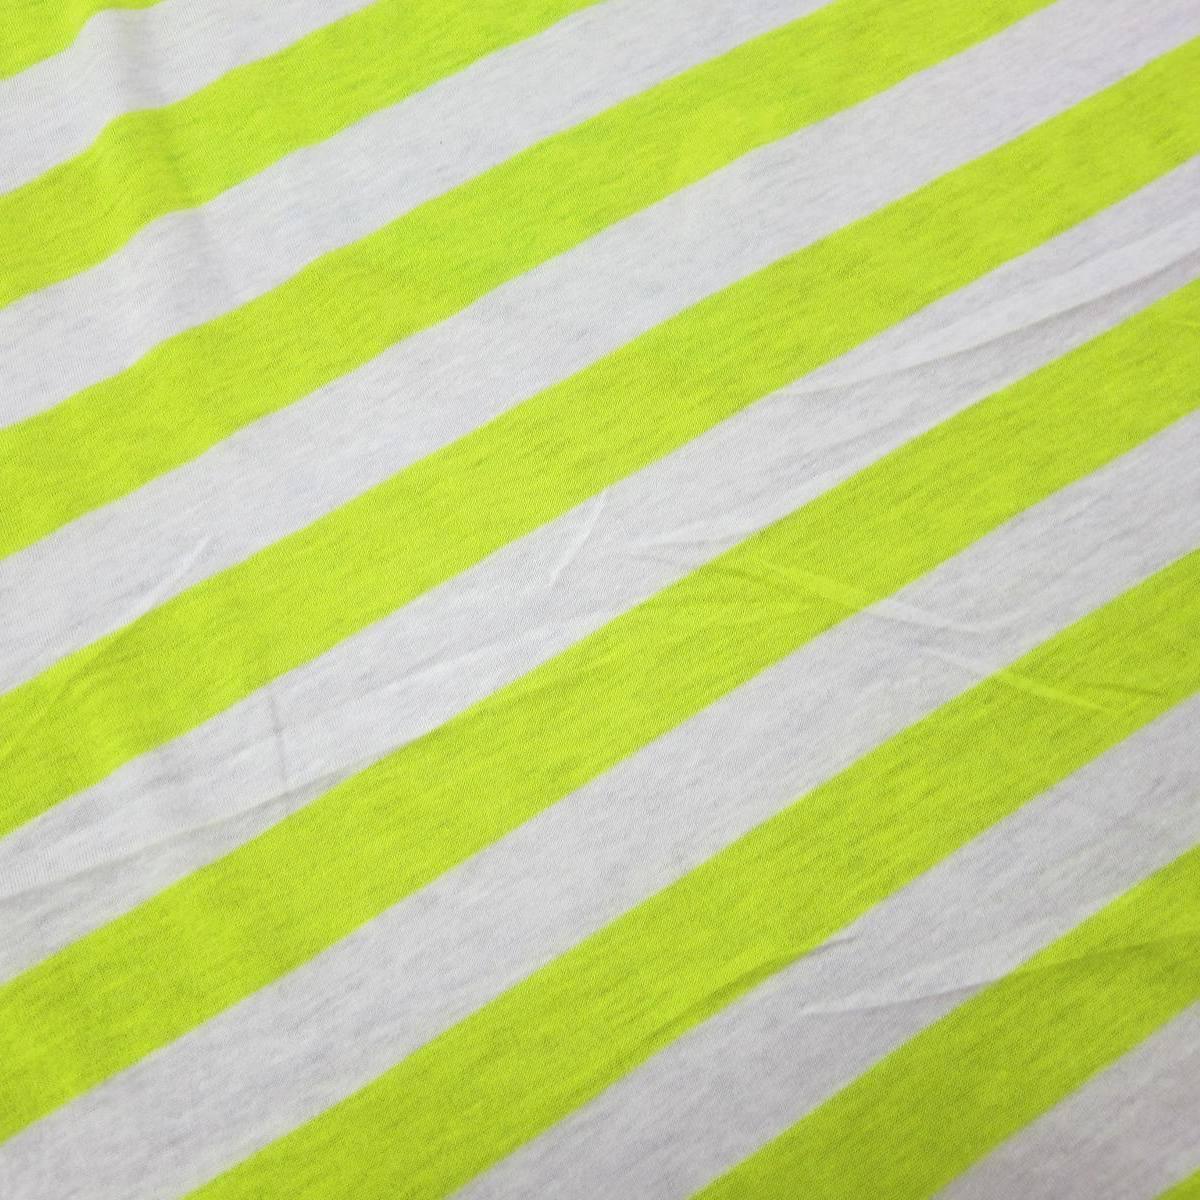 Neon and Light Yellow 1 1/4" Stripes on Cotton/Poly Jersey